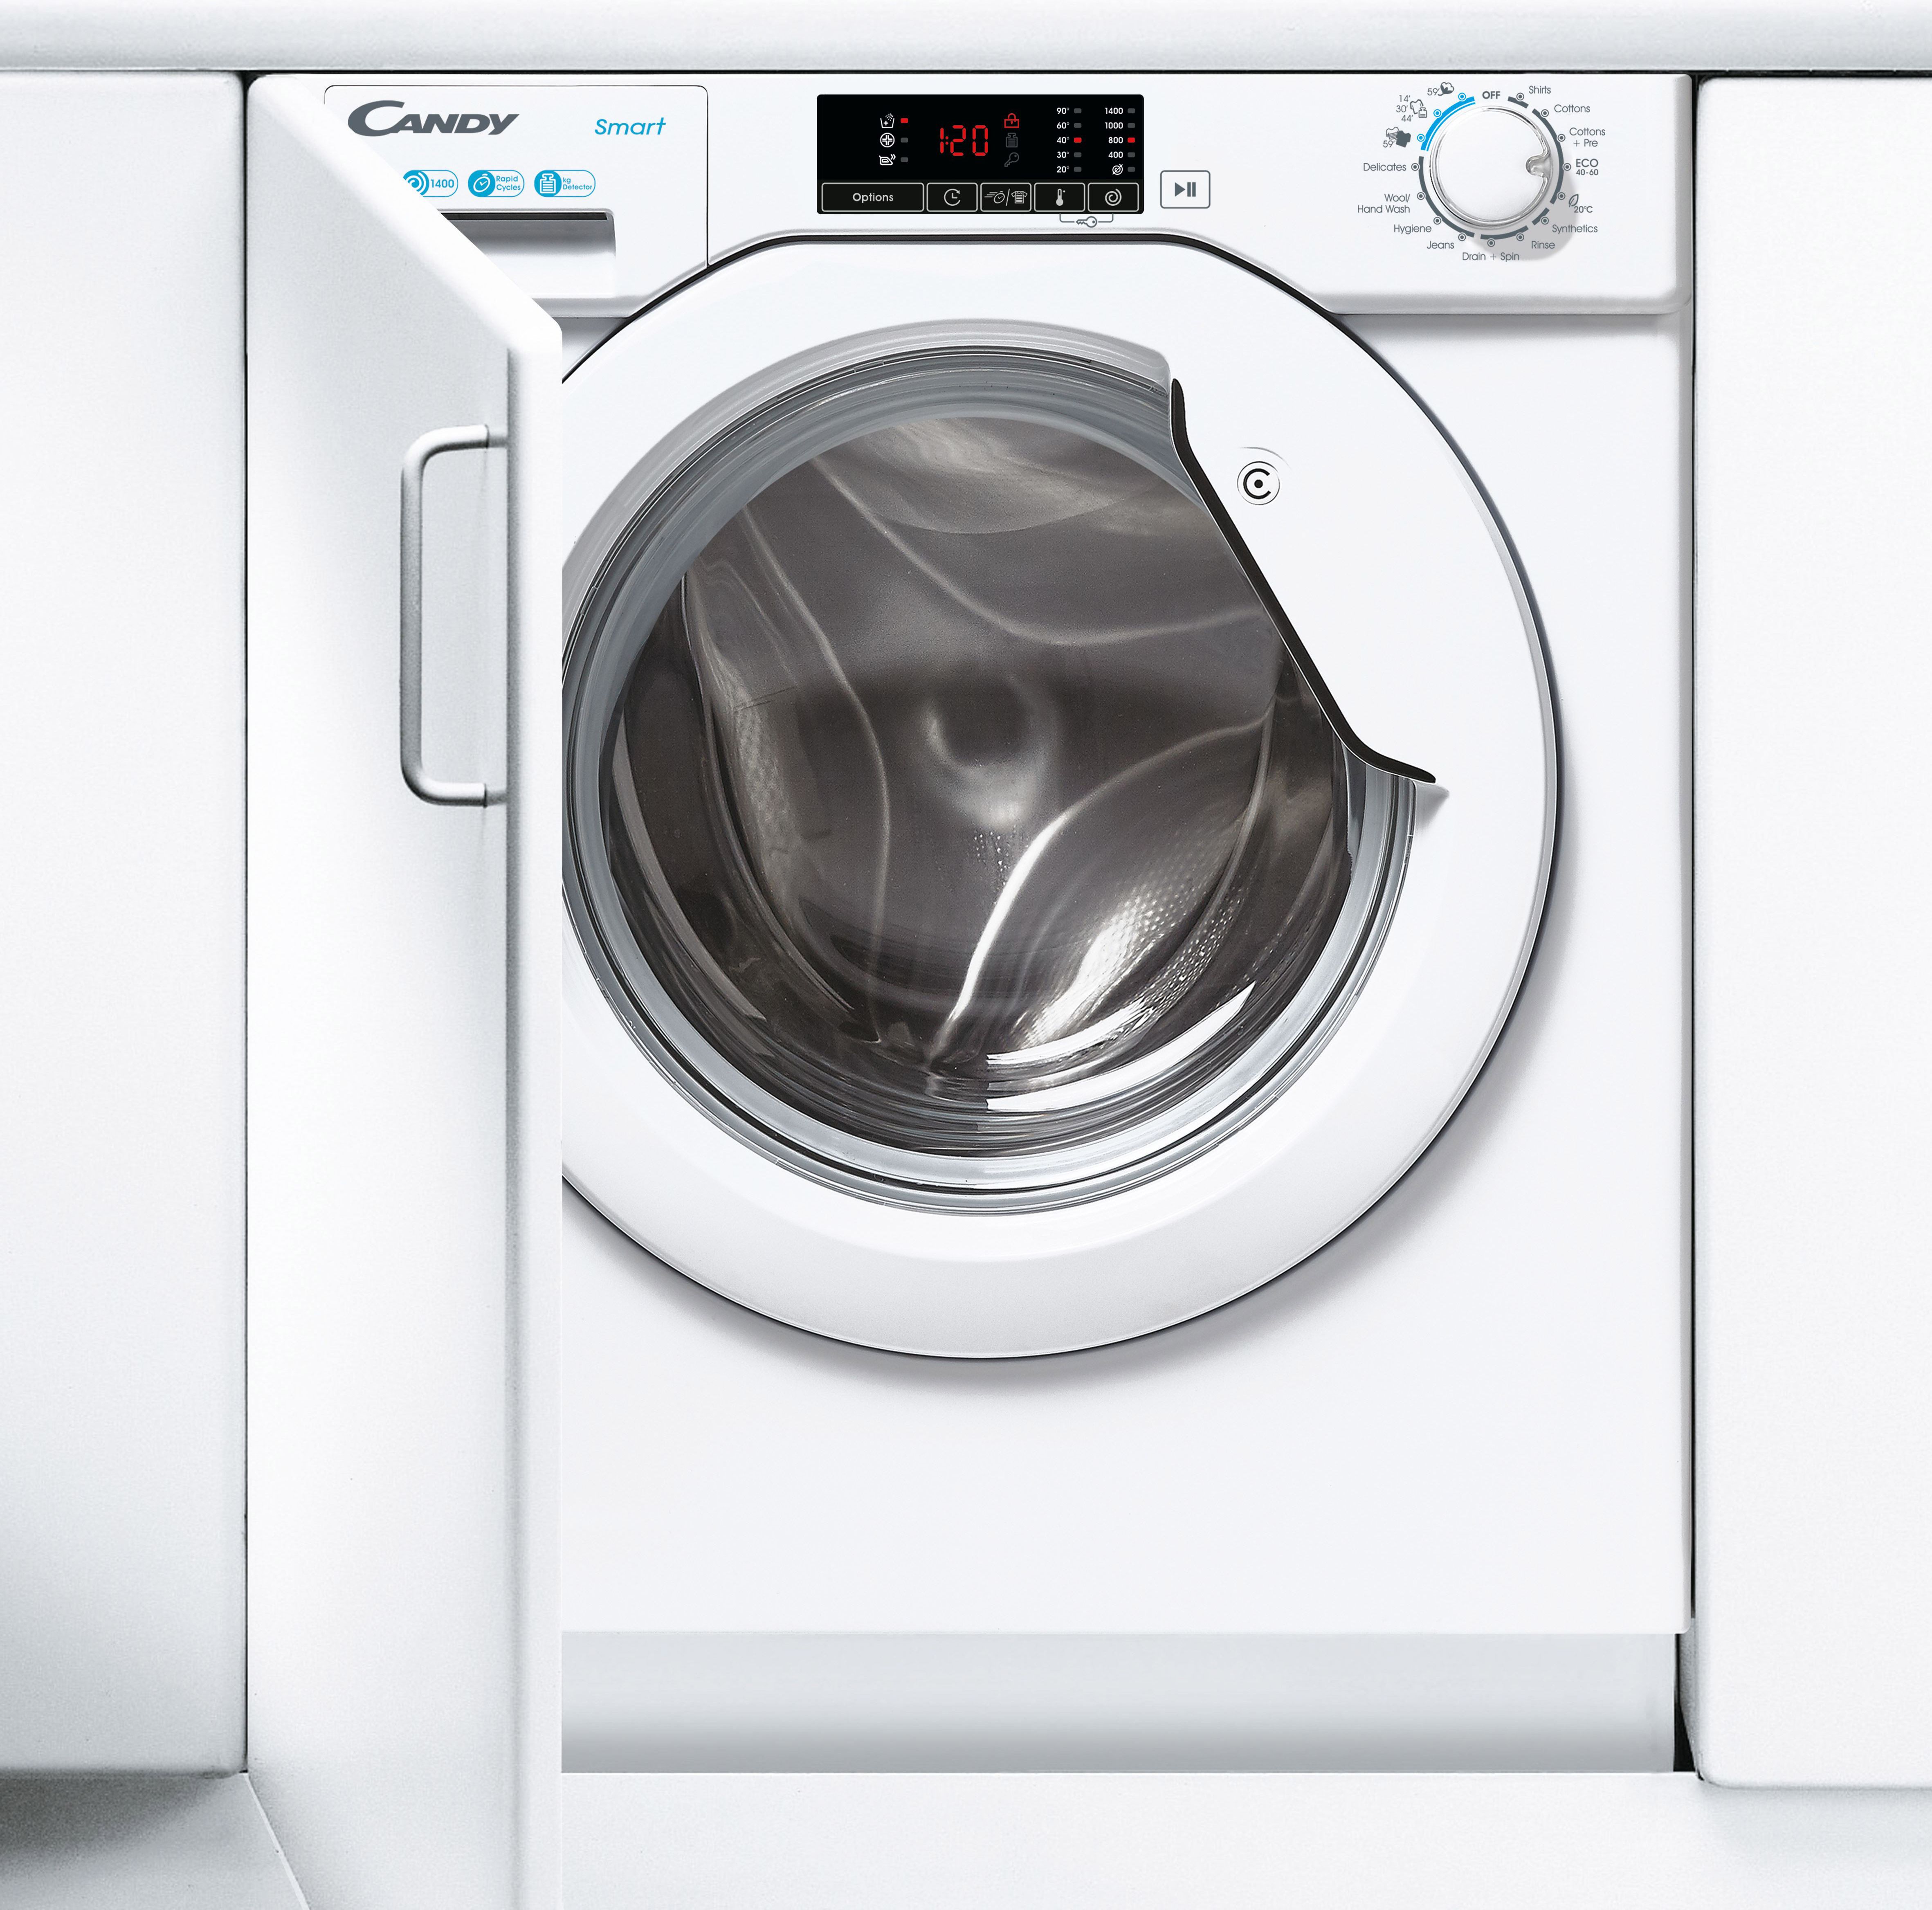 Candy Smart CBW49D1W4 Integrated 9kg Washing Machine with 1400 rpm - White - B Rated, White